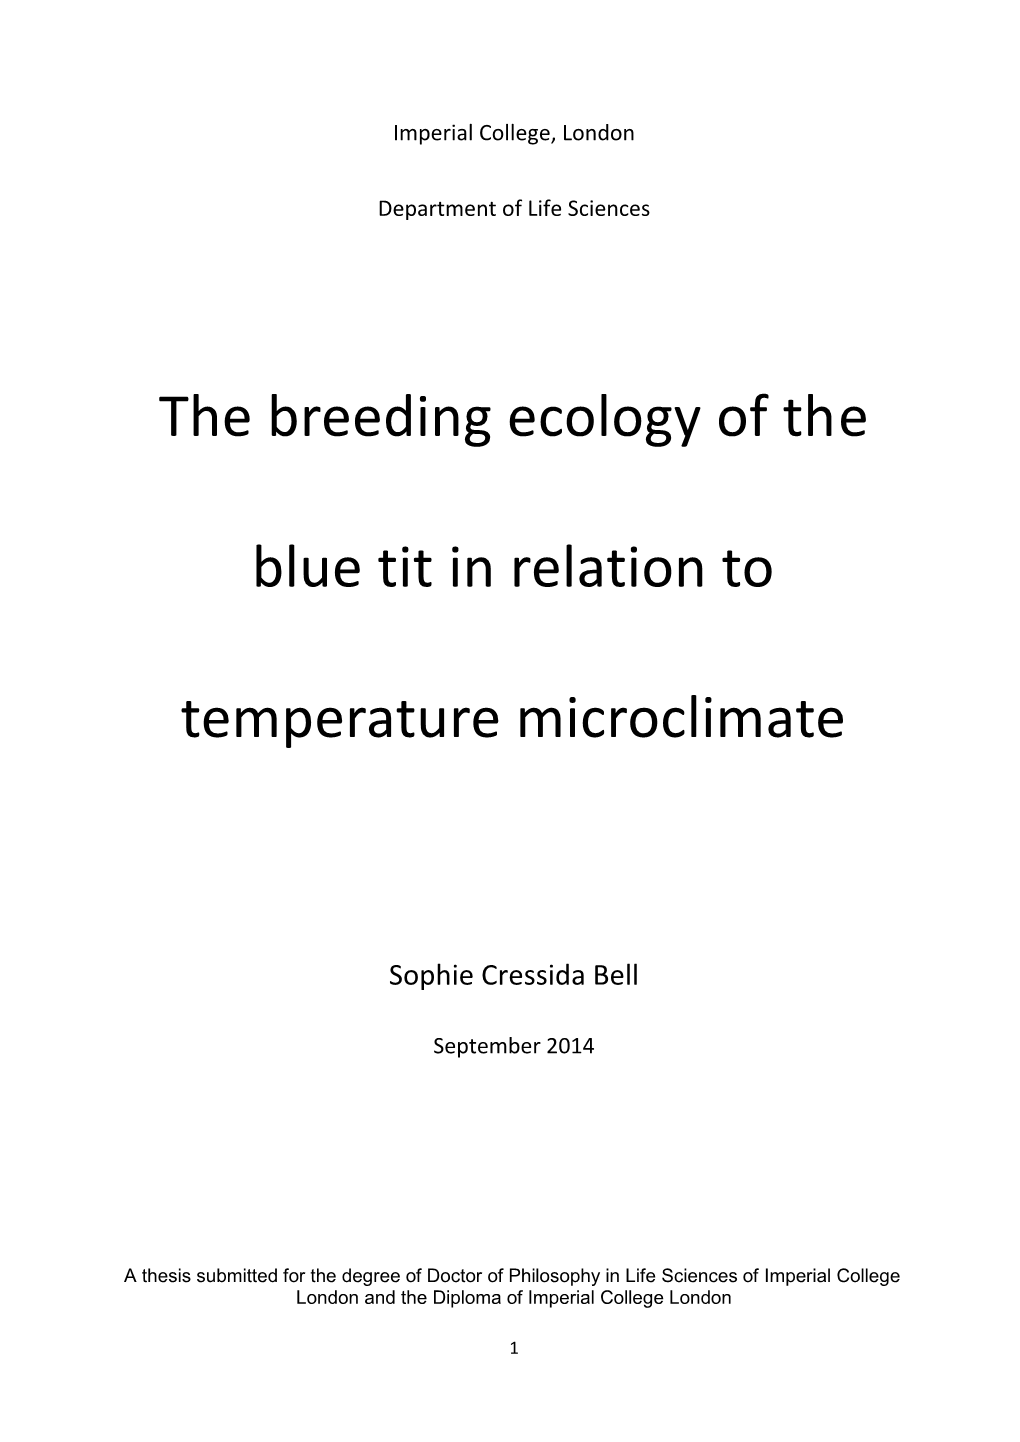 The Breeding Ecology of the Blue Tit in Relation to Temperature Microclimate